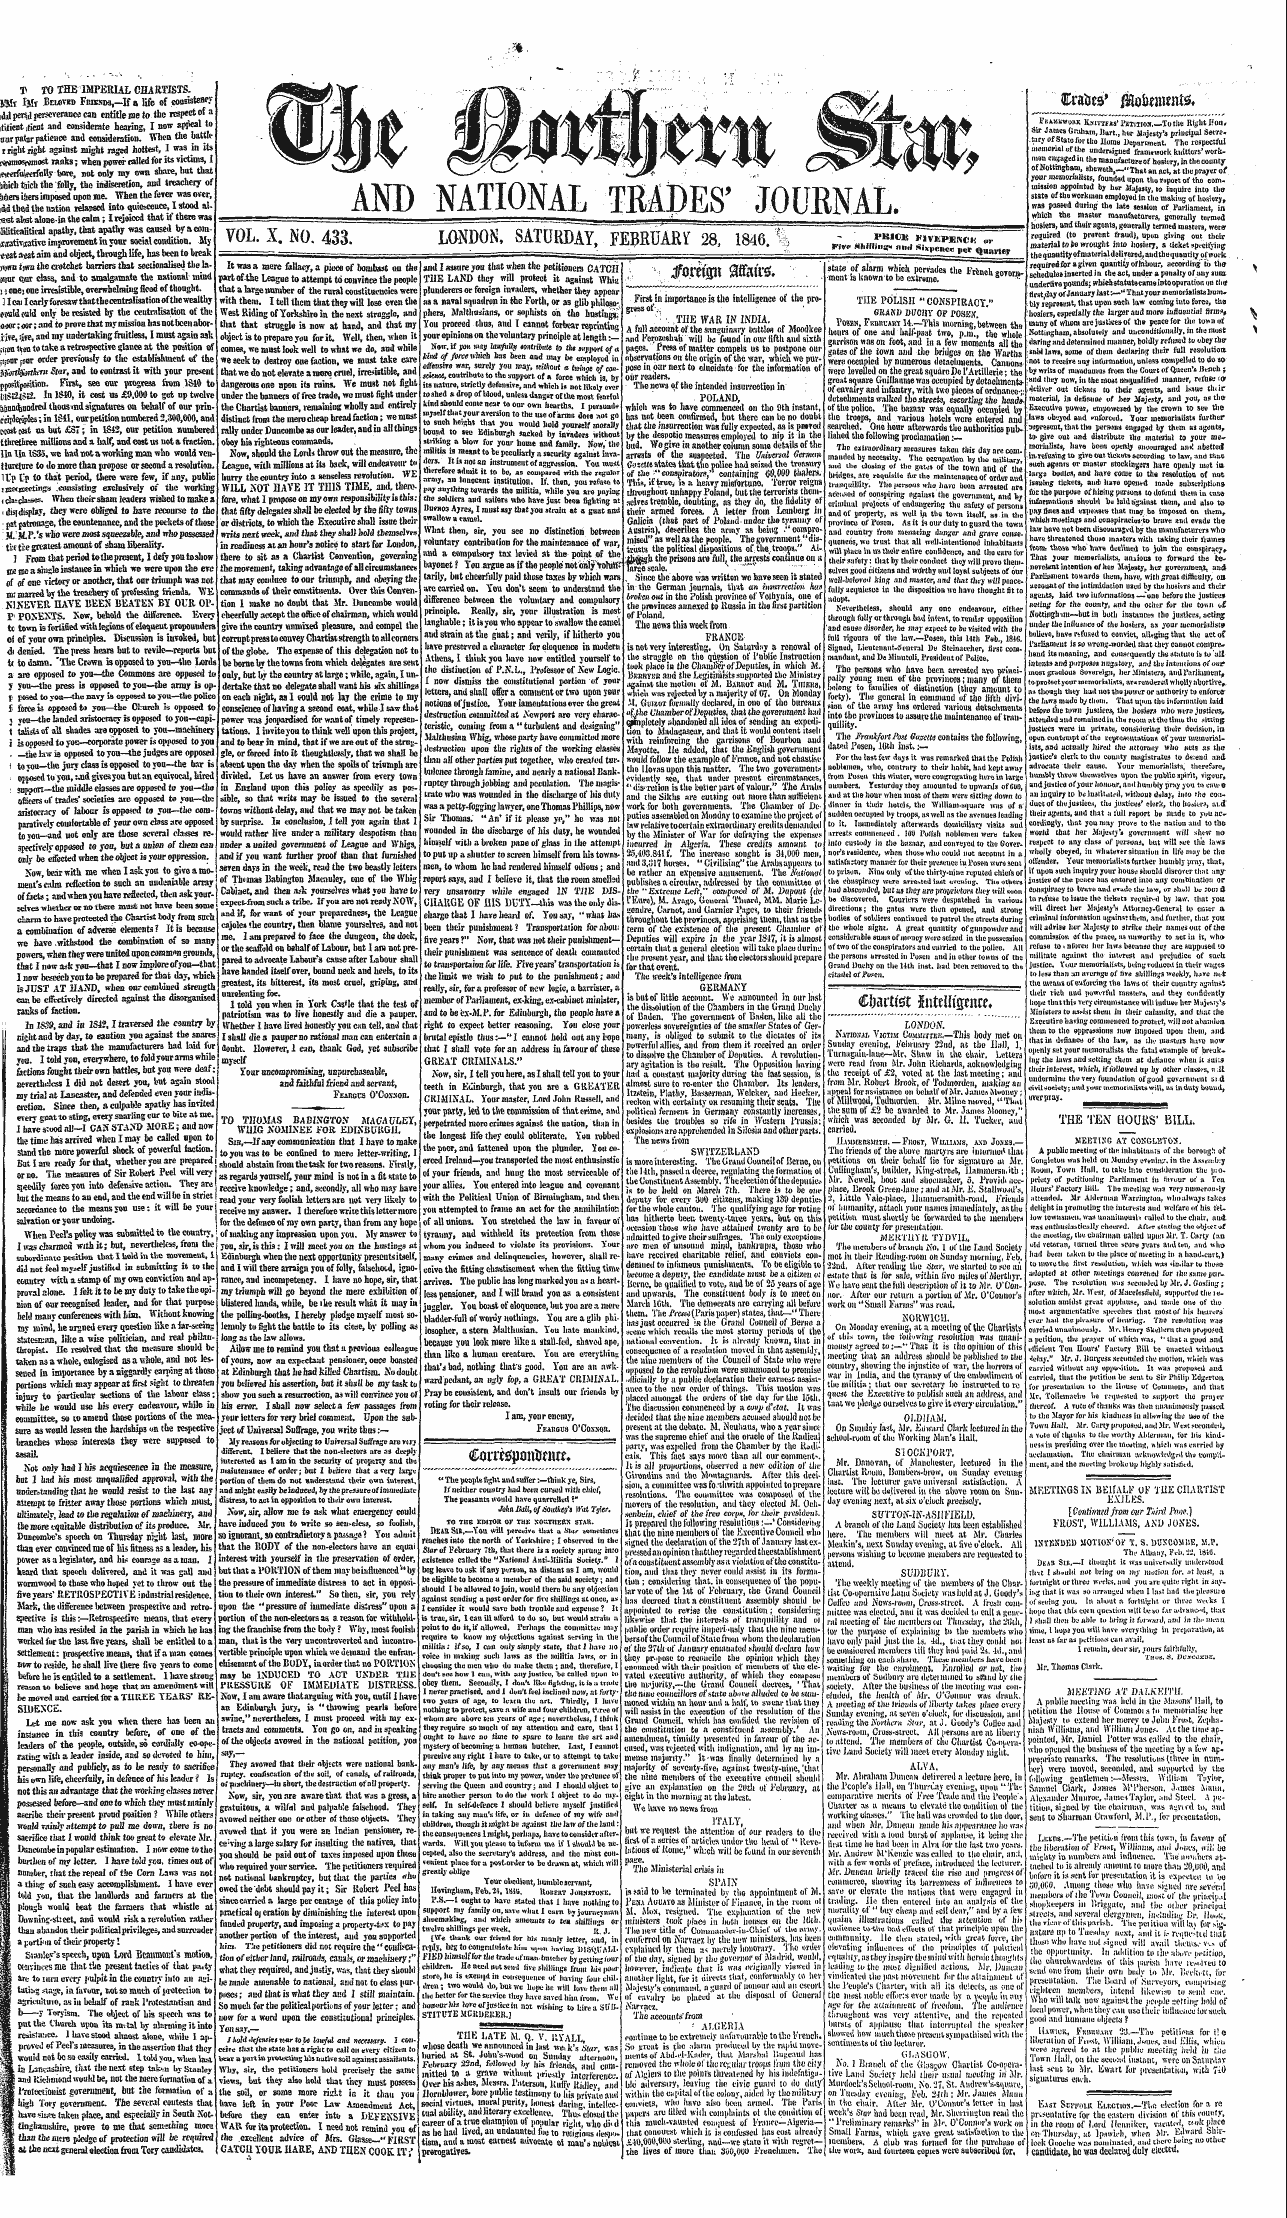 Northern Star (1837-1852): jS F Y, 2nd edition - Am) National Trades' Journal.